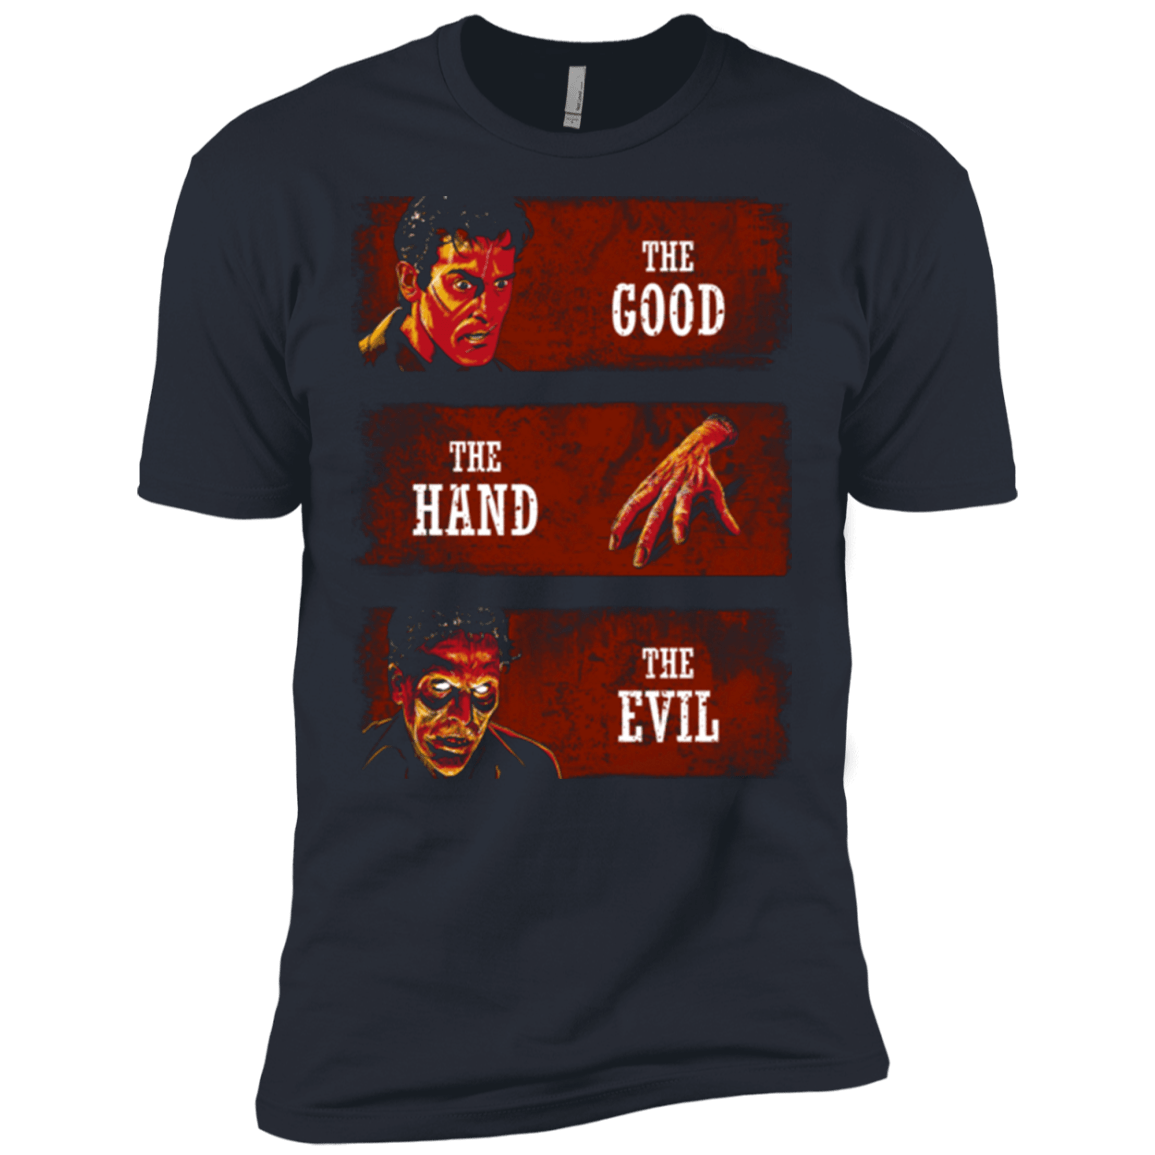 T-Shirts Indigo / X-Small The Good the Hand and the Evil Men's Premium T-Shirt